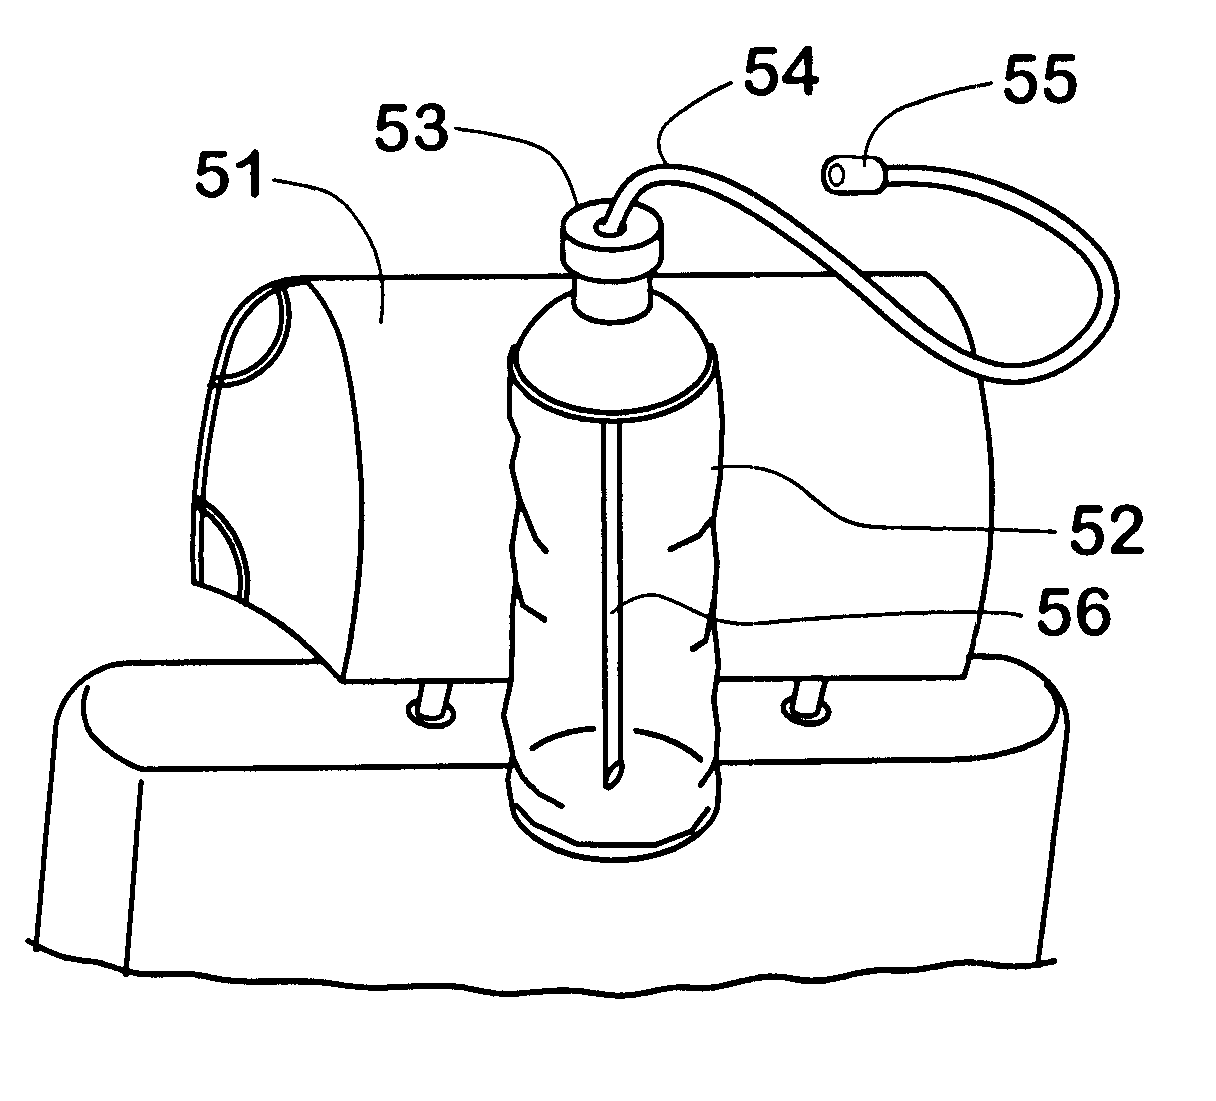 Water-supply pack assembly